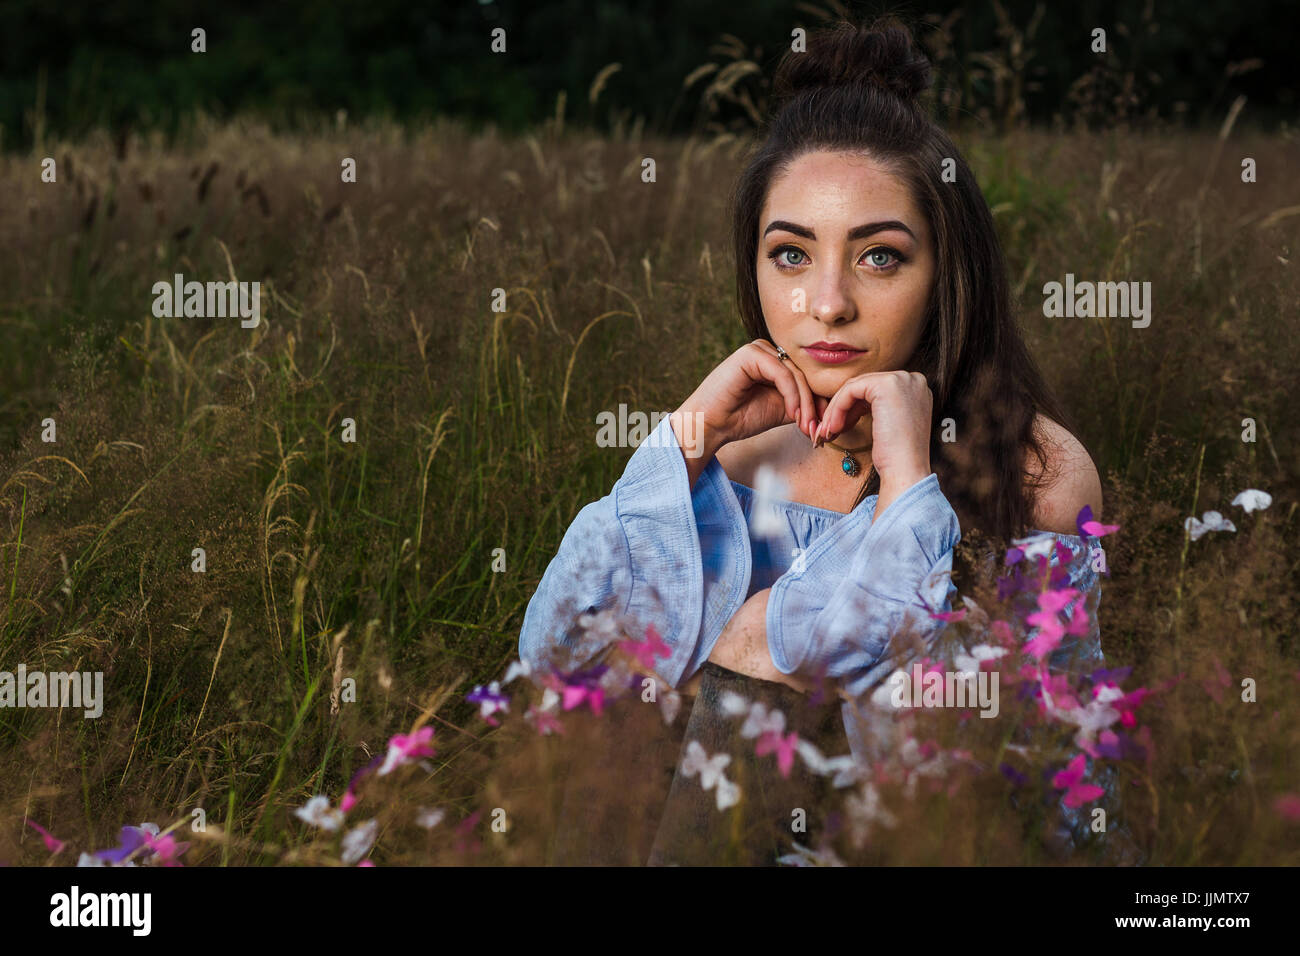 My friend gives a serious expression on her face during an outdoor potrait one summers evening in a meadow near Liverpool. Stock Photo